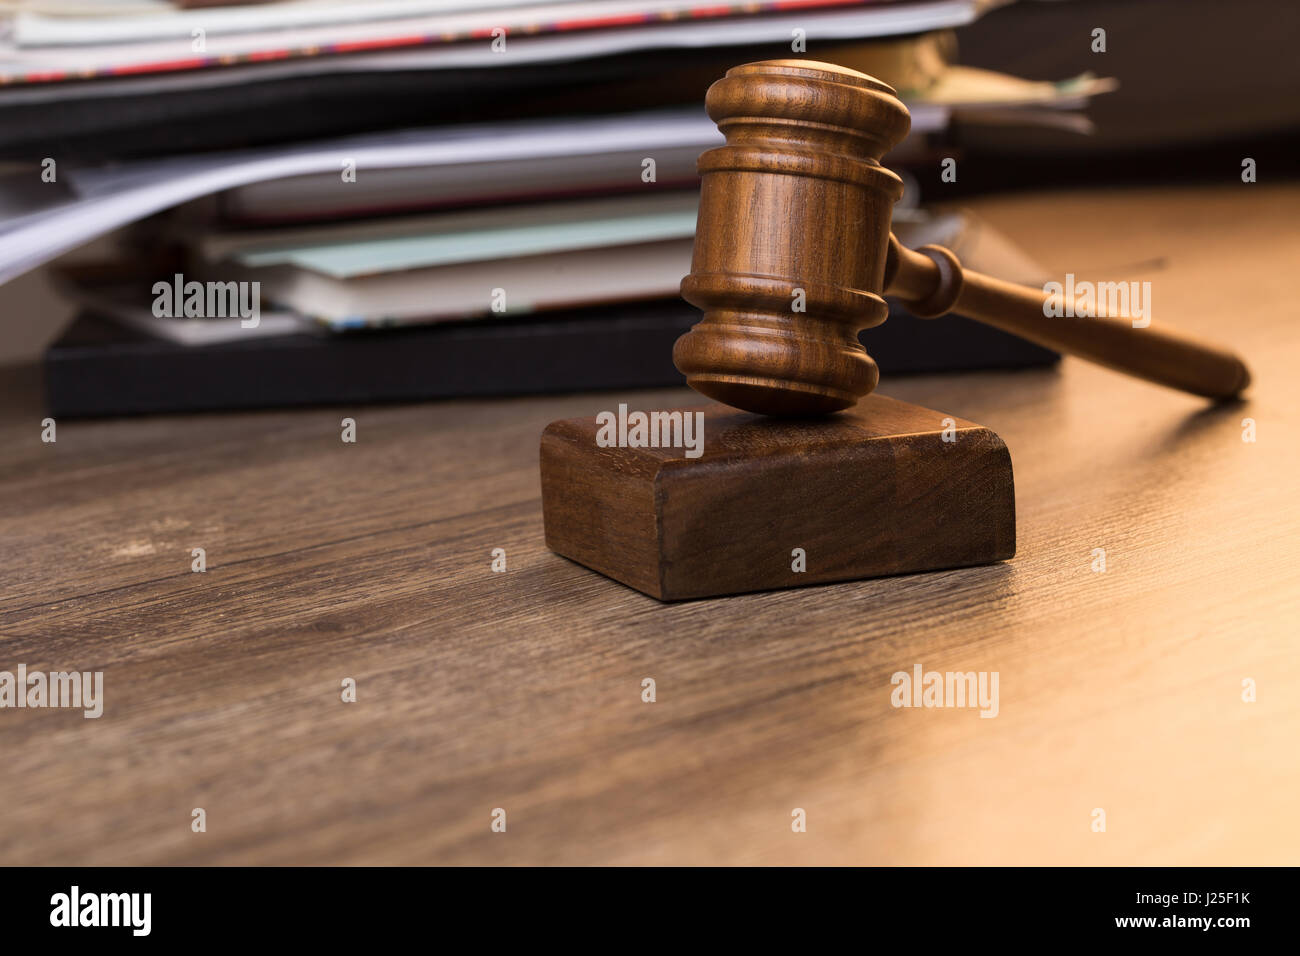 Photography of hammer wooden chairman Stock Photo